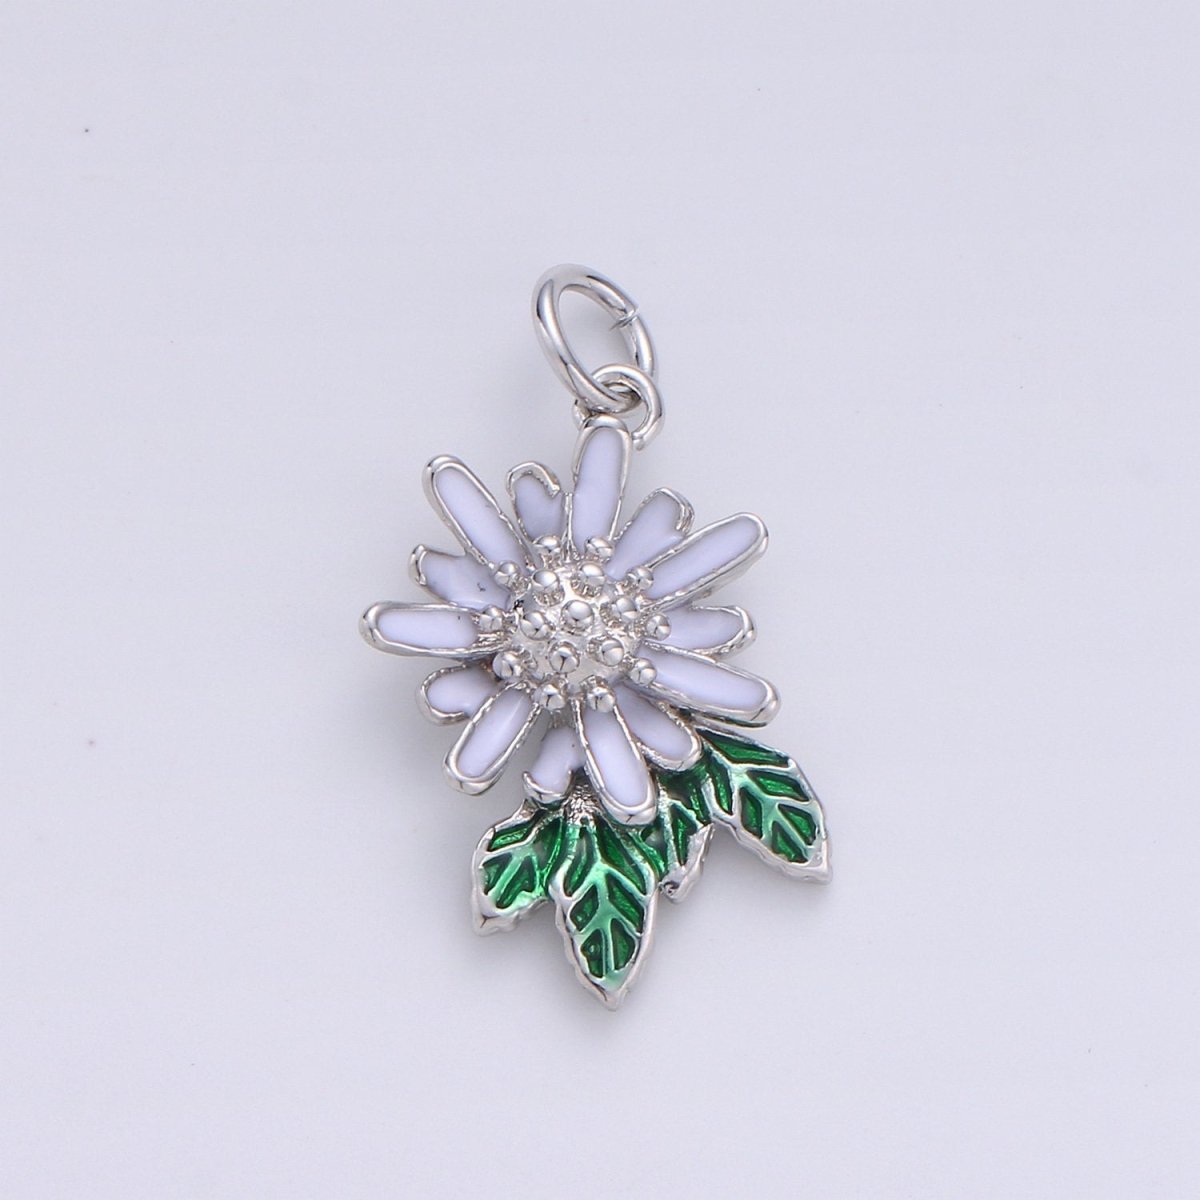 Dainty Sun Flower Charms Enamel Gold Plated for Bracelet Necklace Earring Component Summer Jewelry Flower Floral Pendant D-262 D-263 - DLUXCA